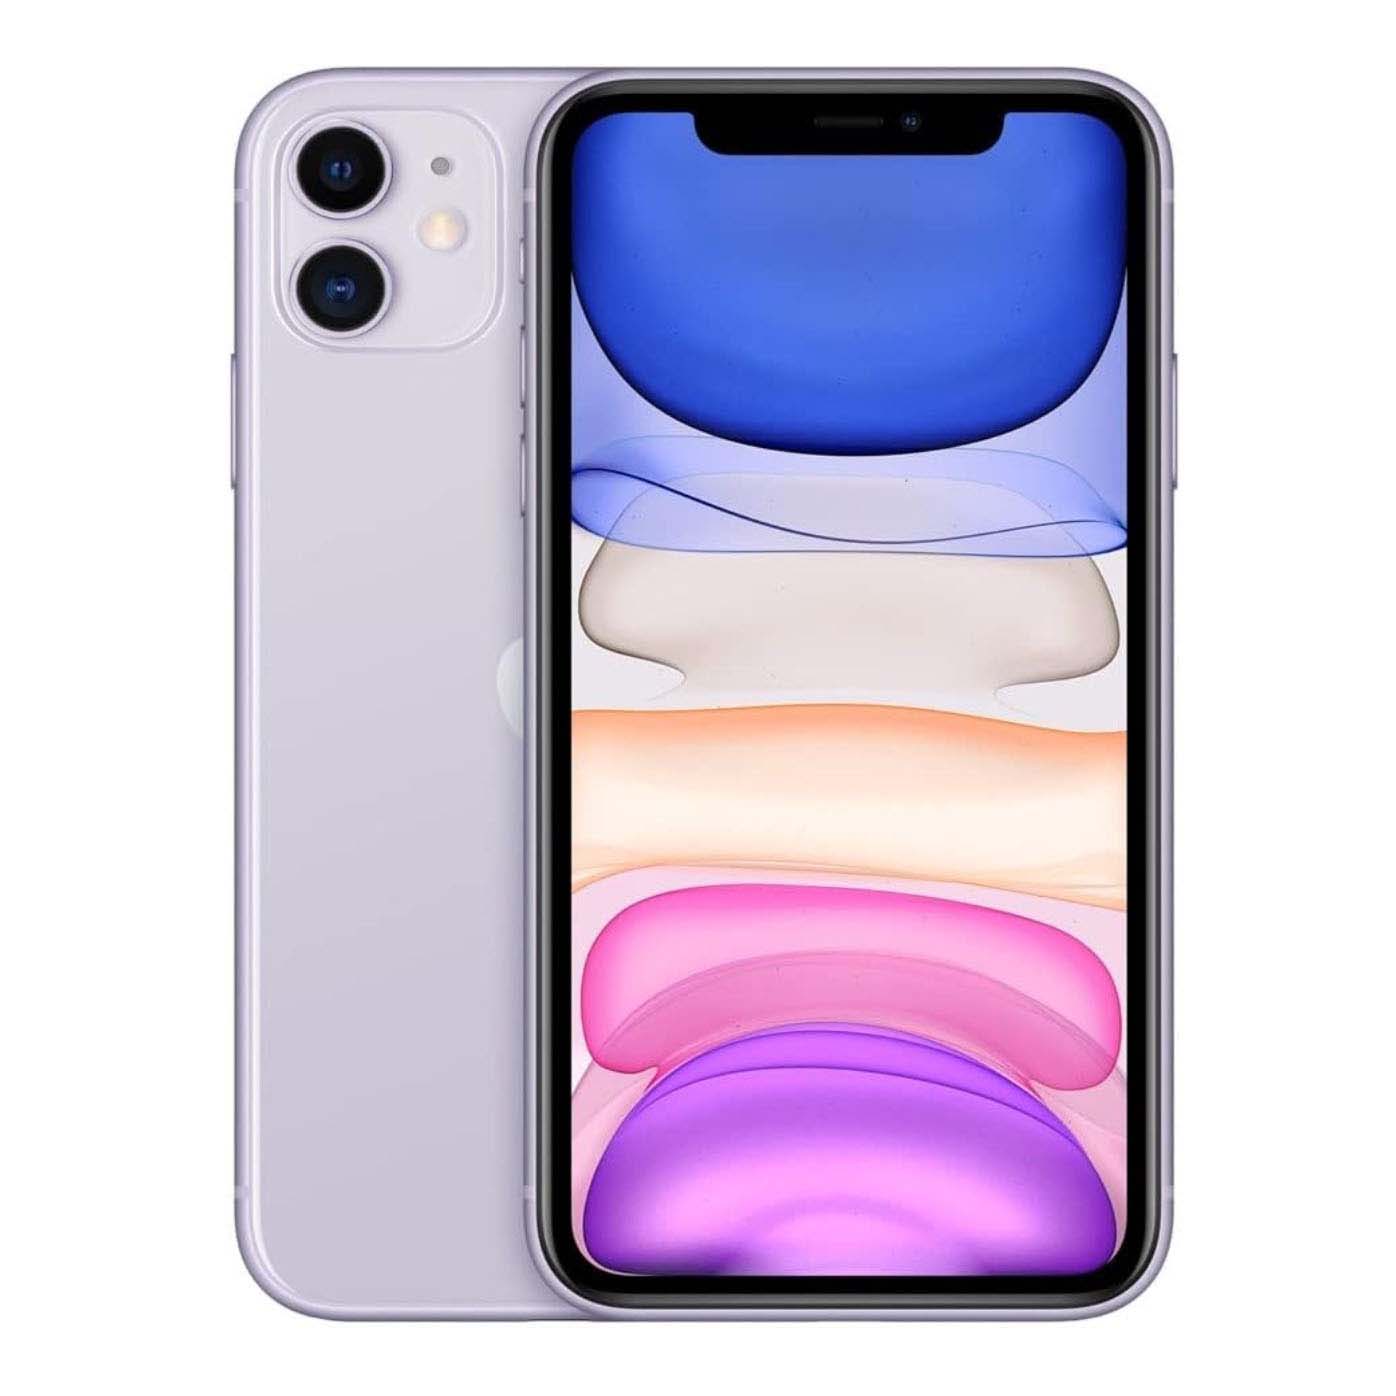 Apple iPhone 11 front and back view in lavender